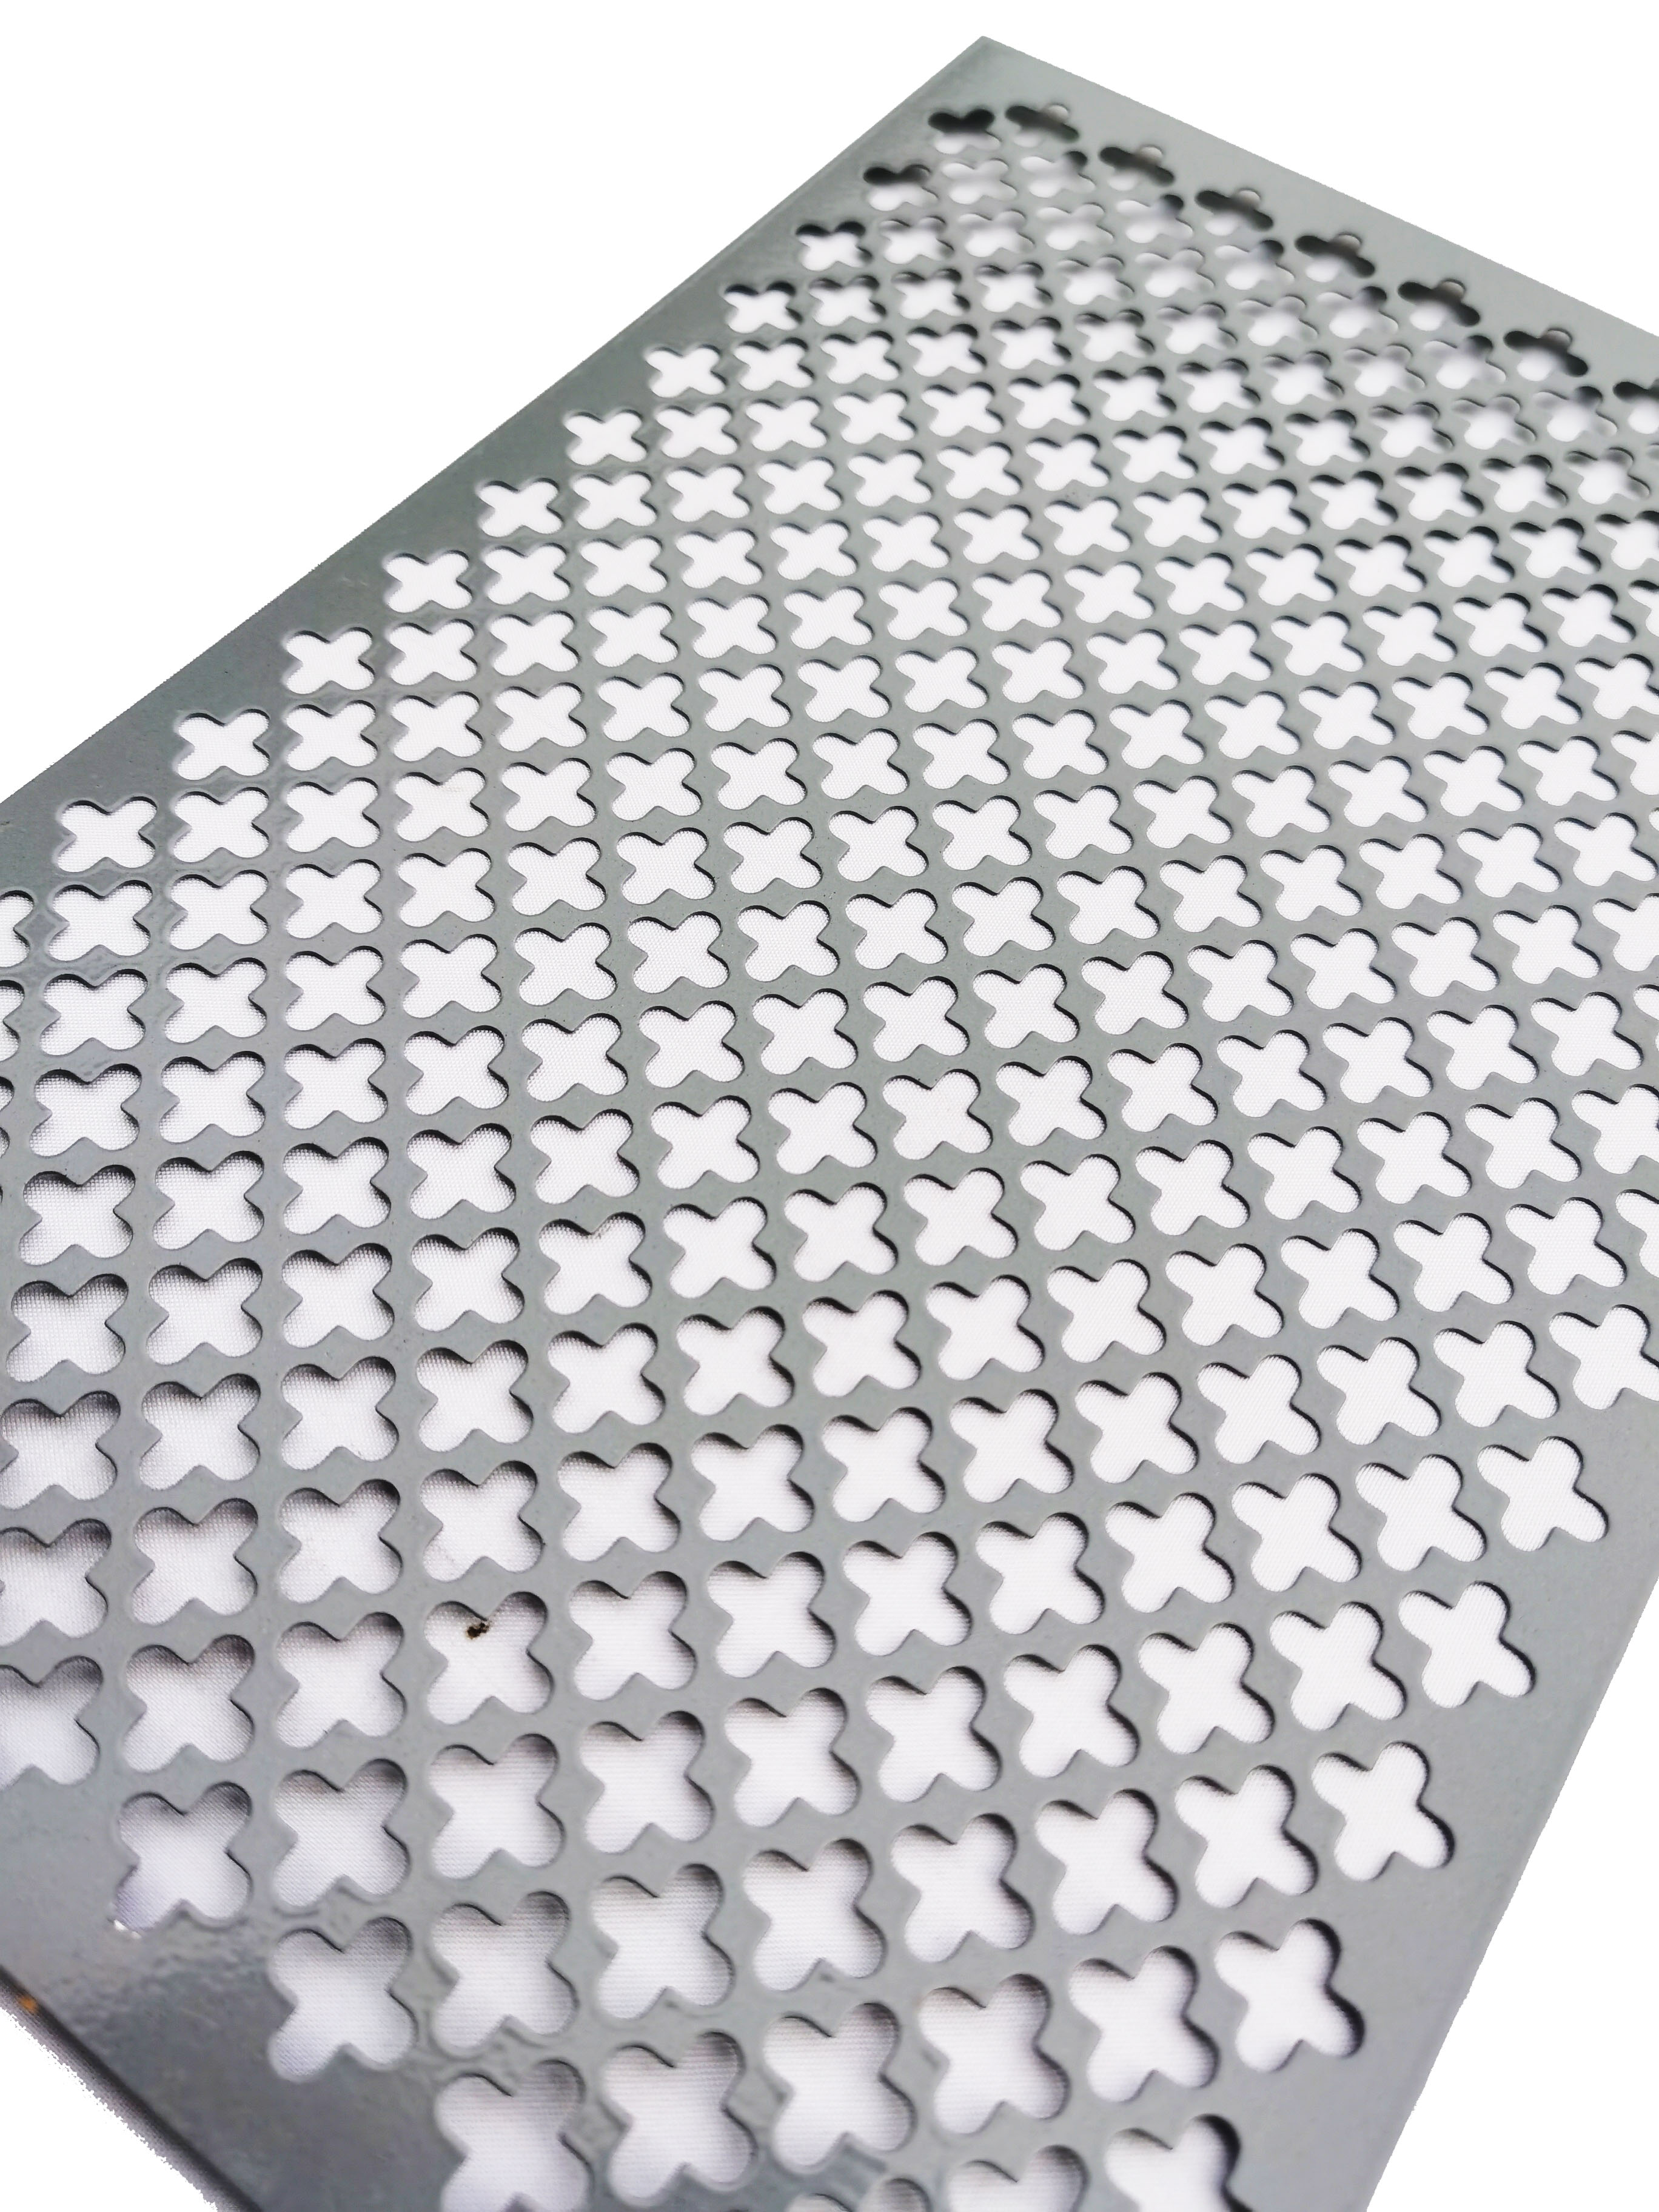 304 316 Stainless Steel Decorative Perforated Metal Sheet 